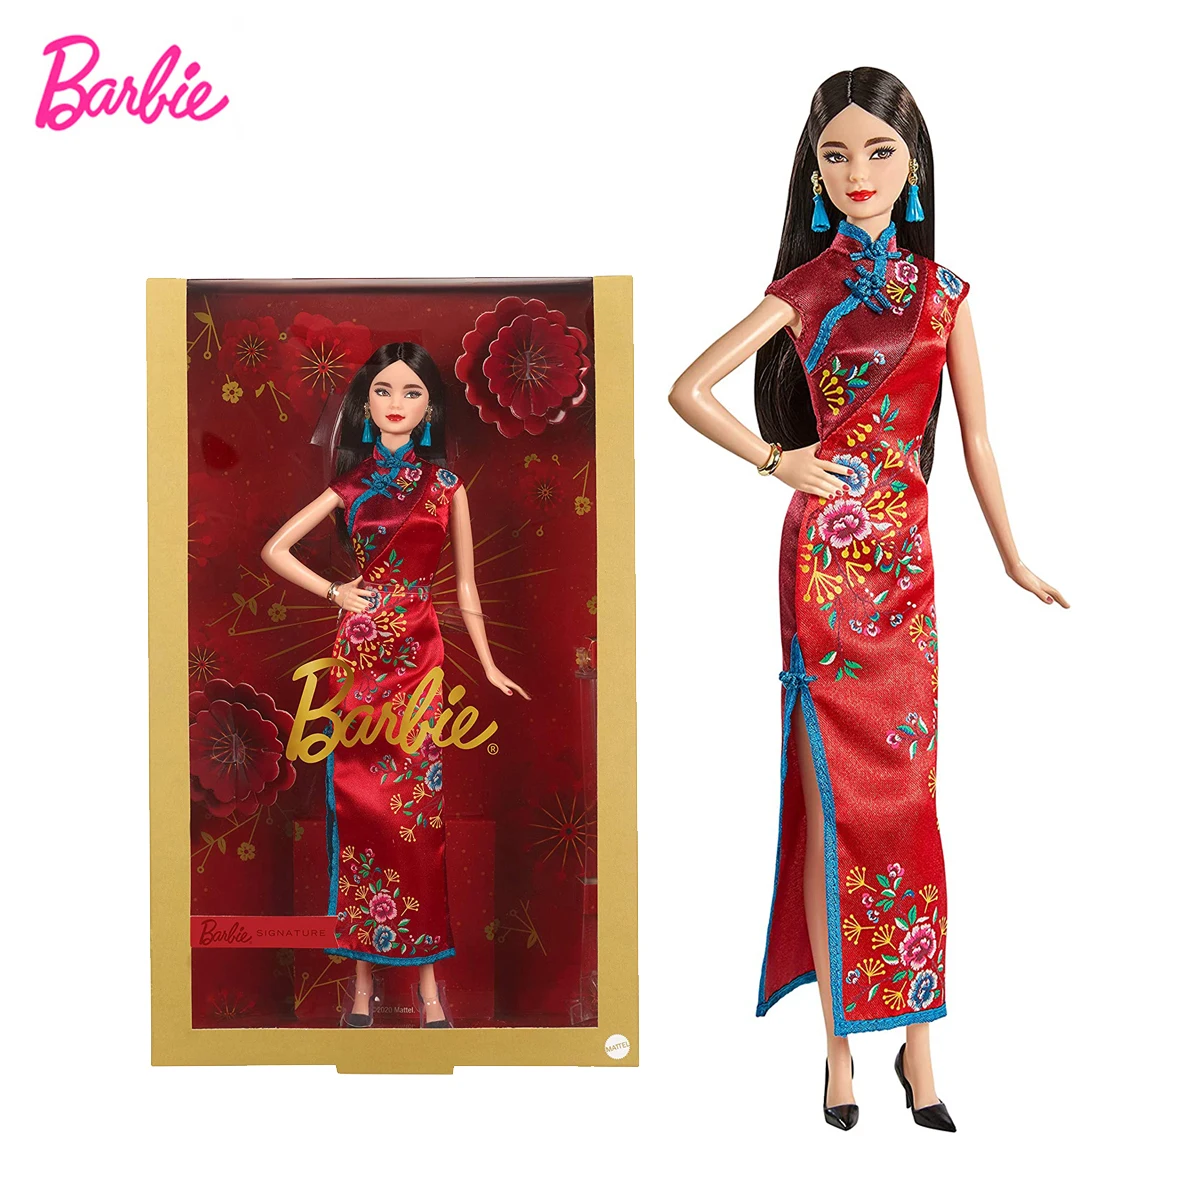 

Barbie Signature Lunar New Year Doll Wearing Red Satin Cheongsam Dress with Accessories Collectors for Kids Birthday Gift GTJ92